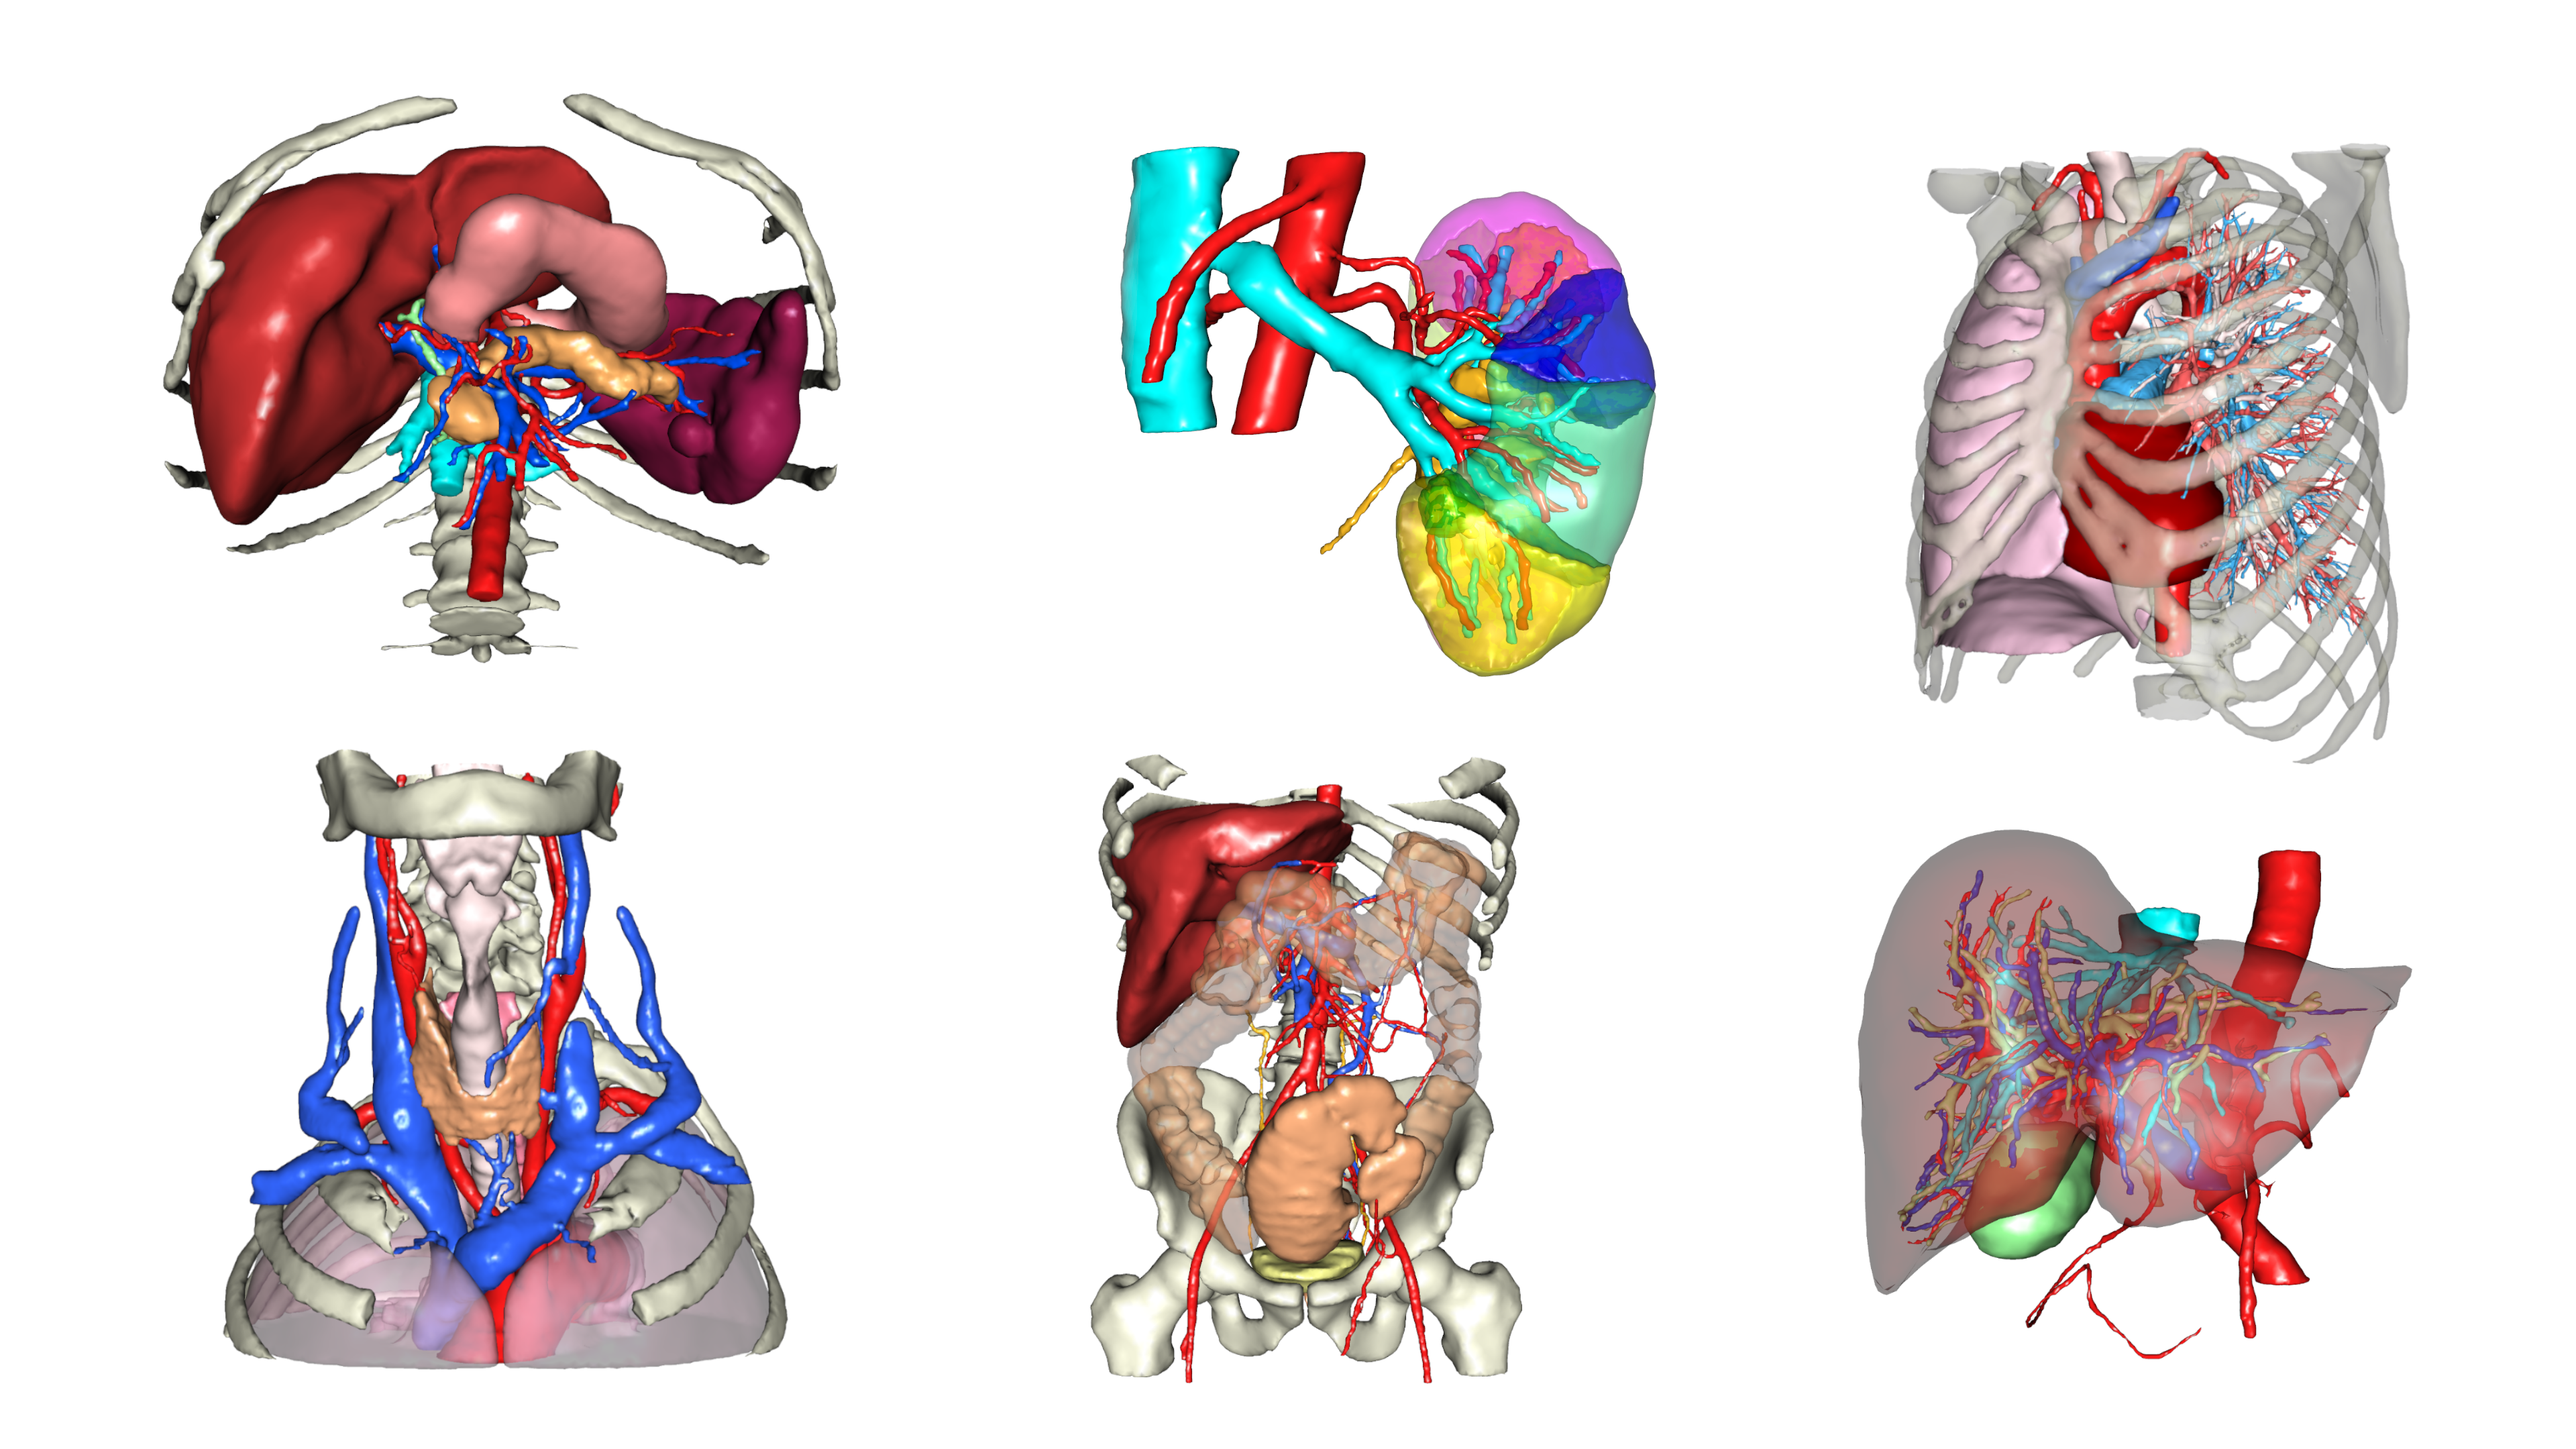 Examples of modeled organs